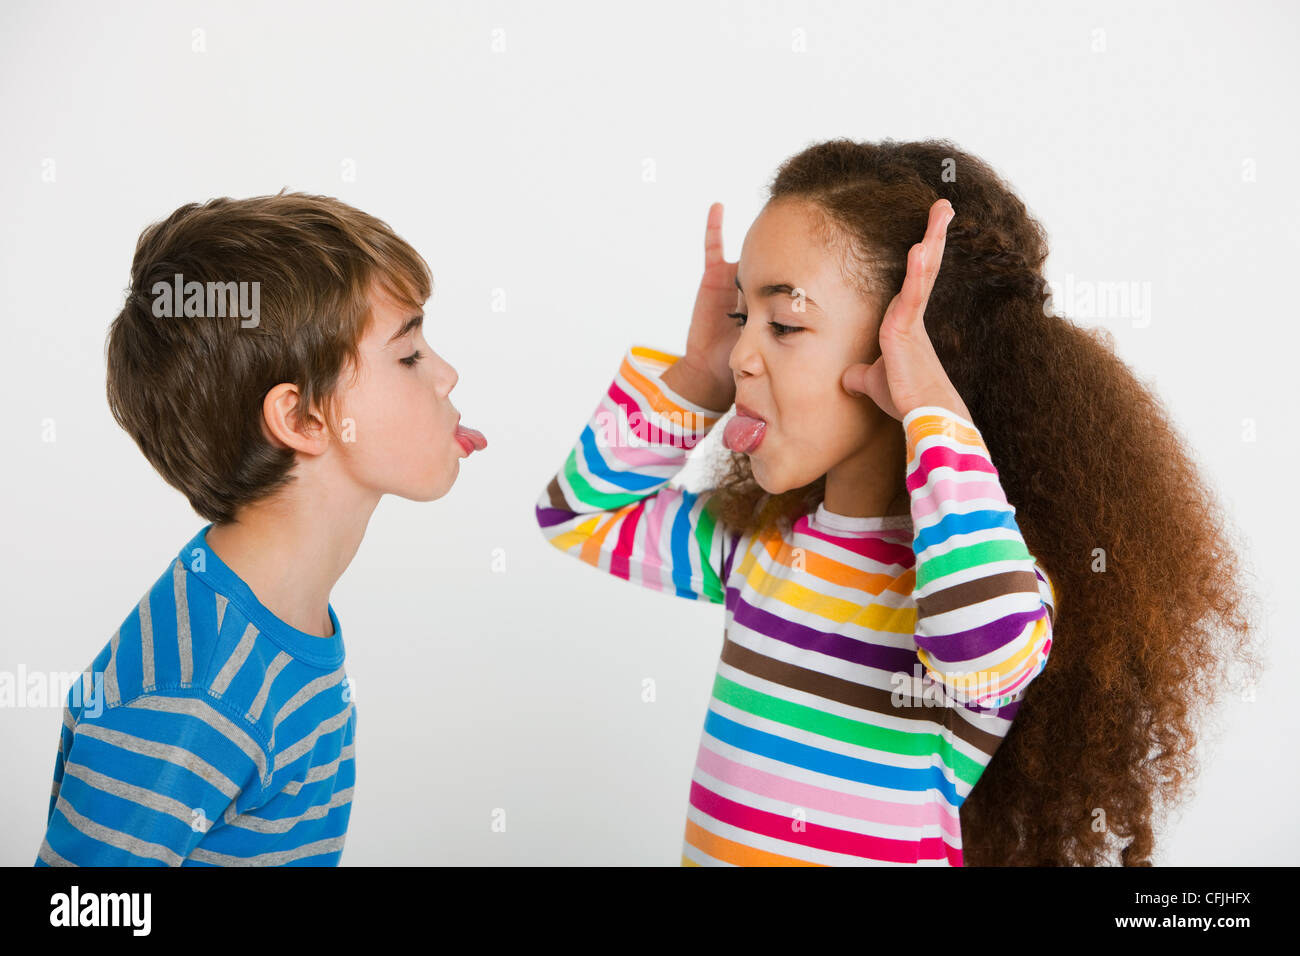 Children making faces at each other Stock Photo